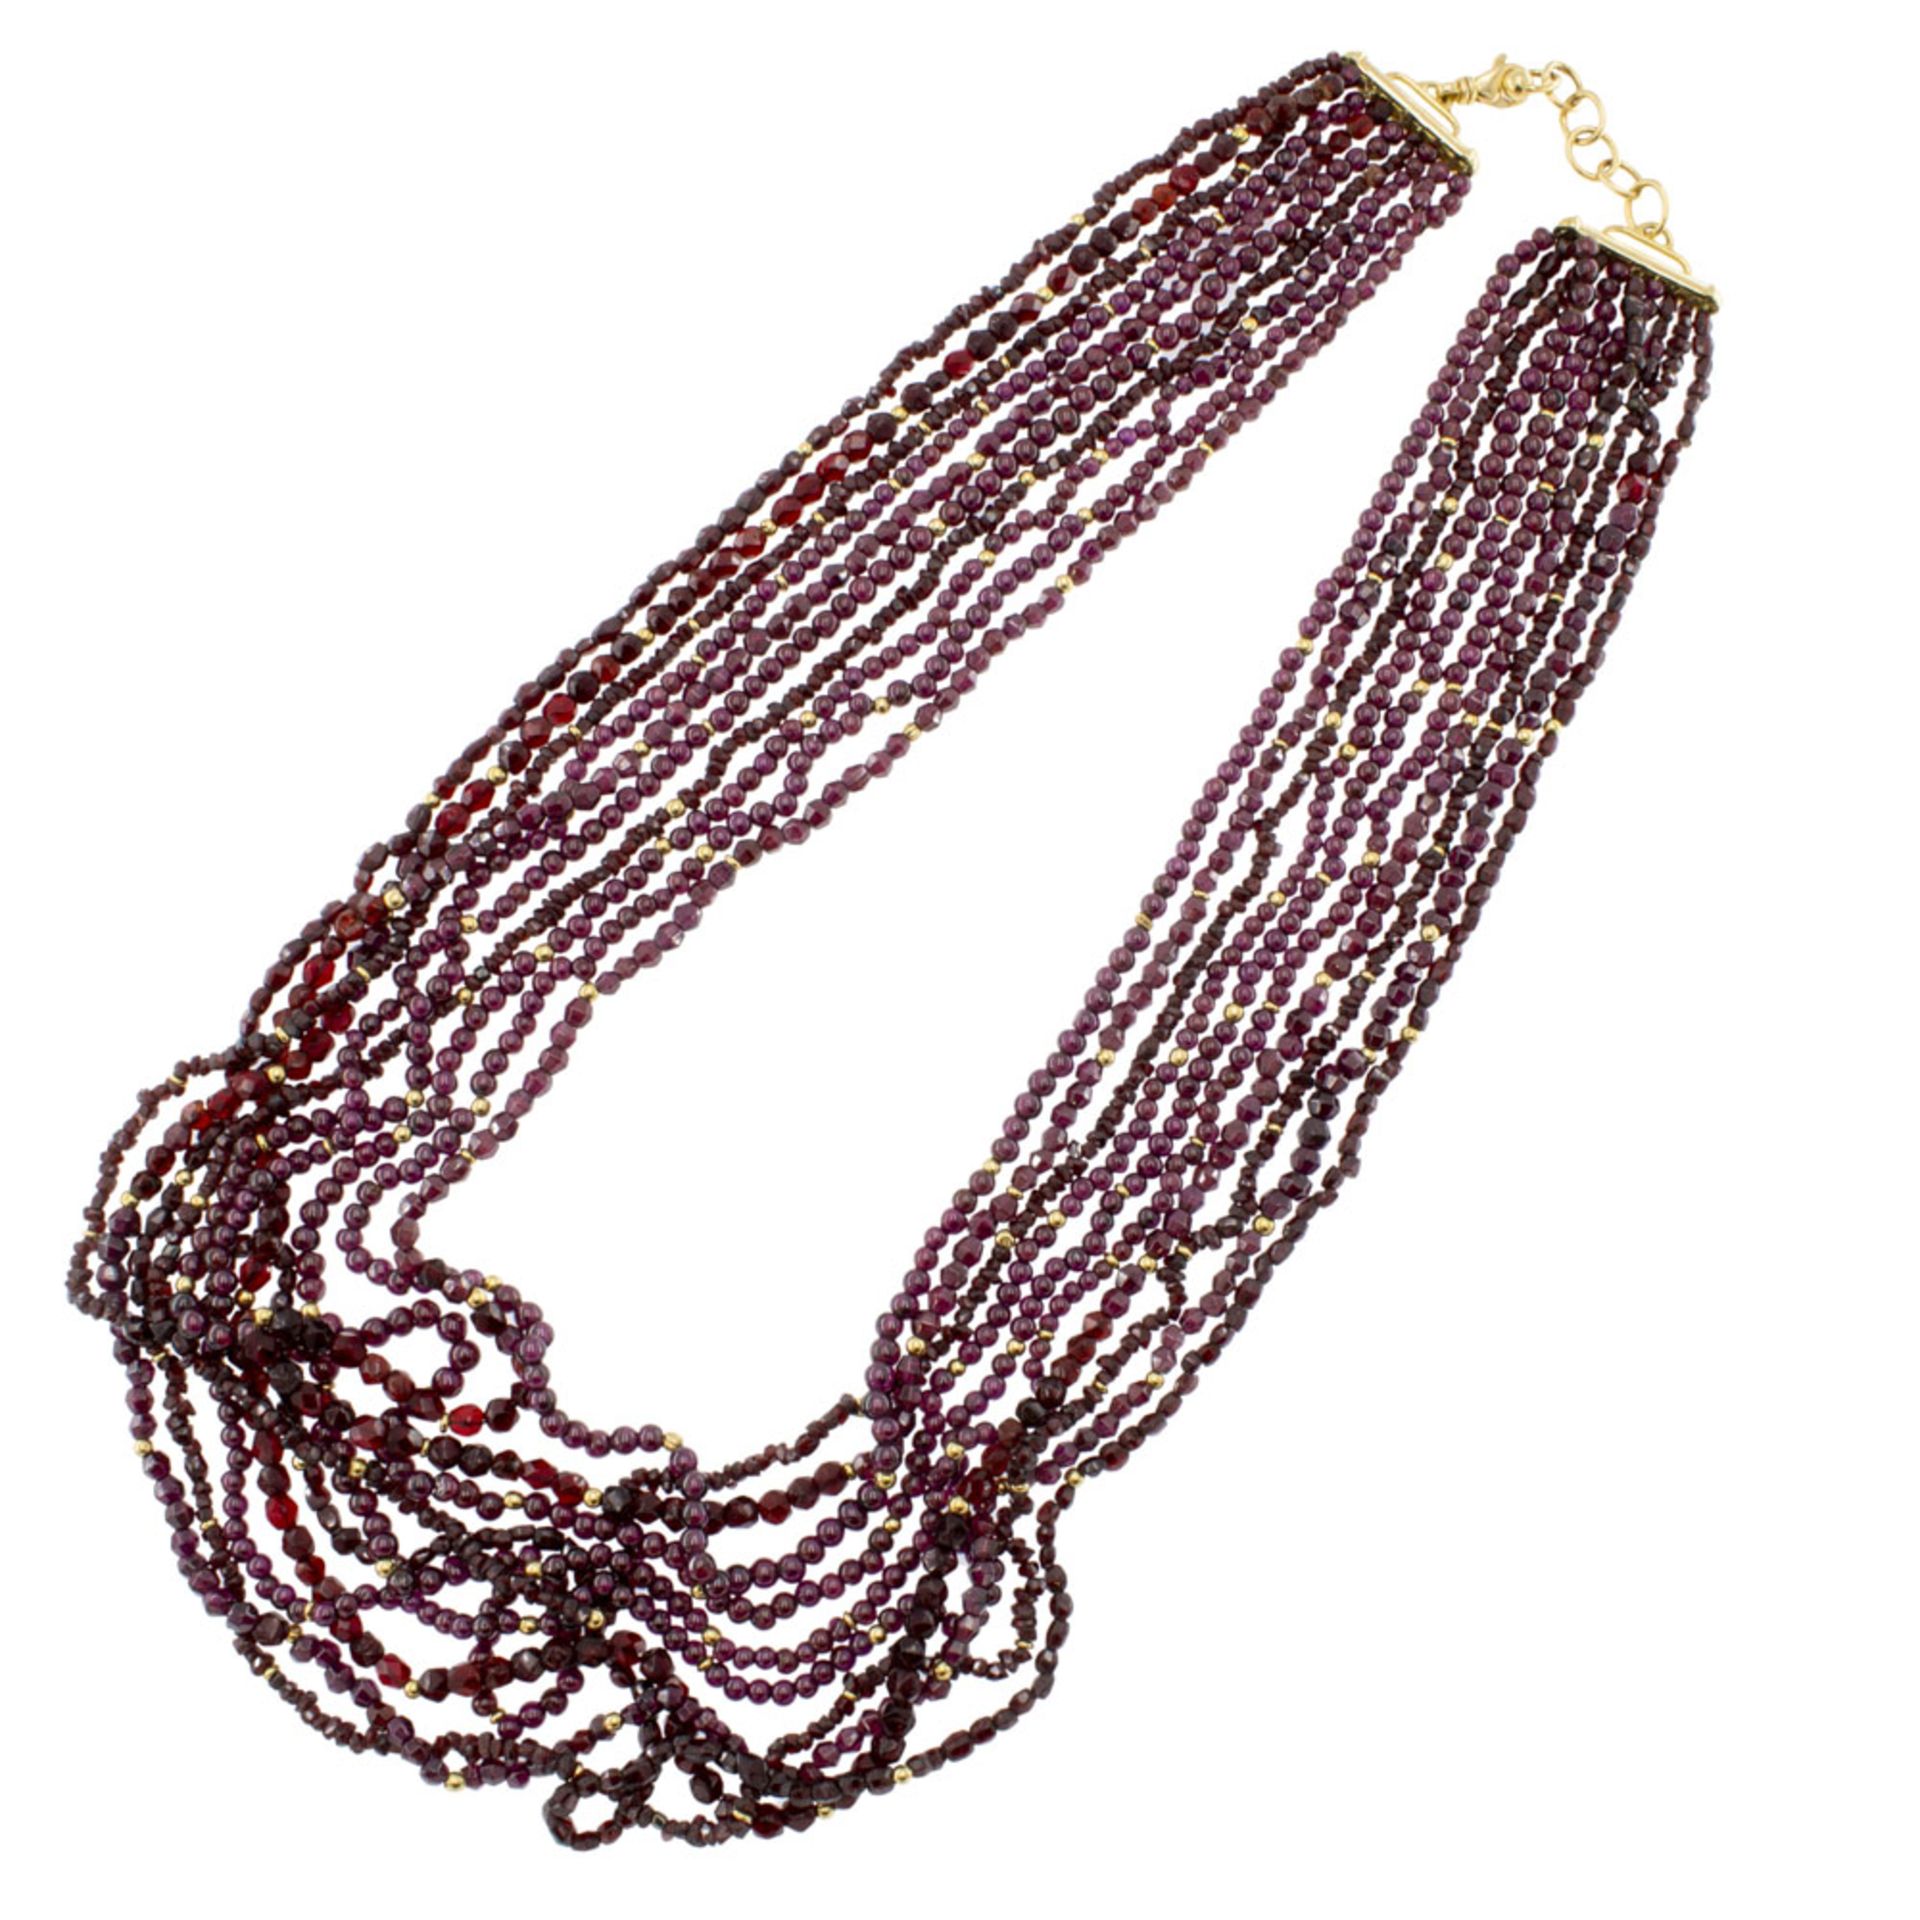 Ten-strand garnet and 18kt yellow gold necklace